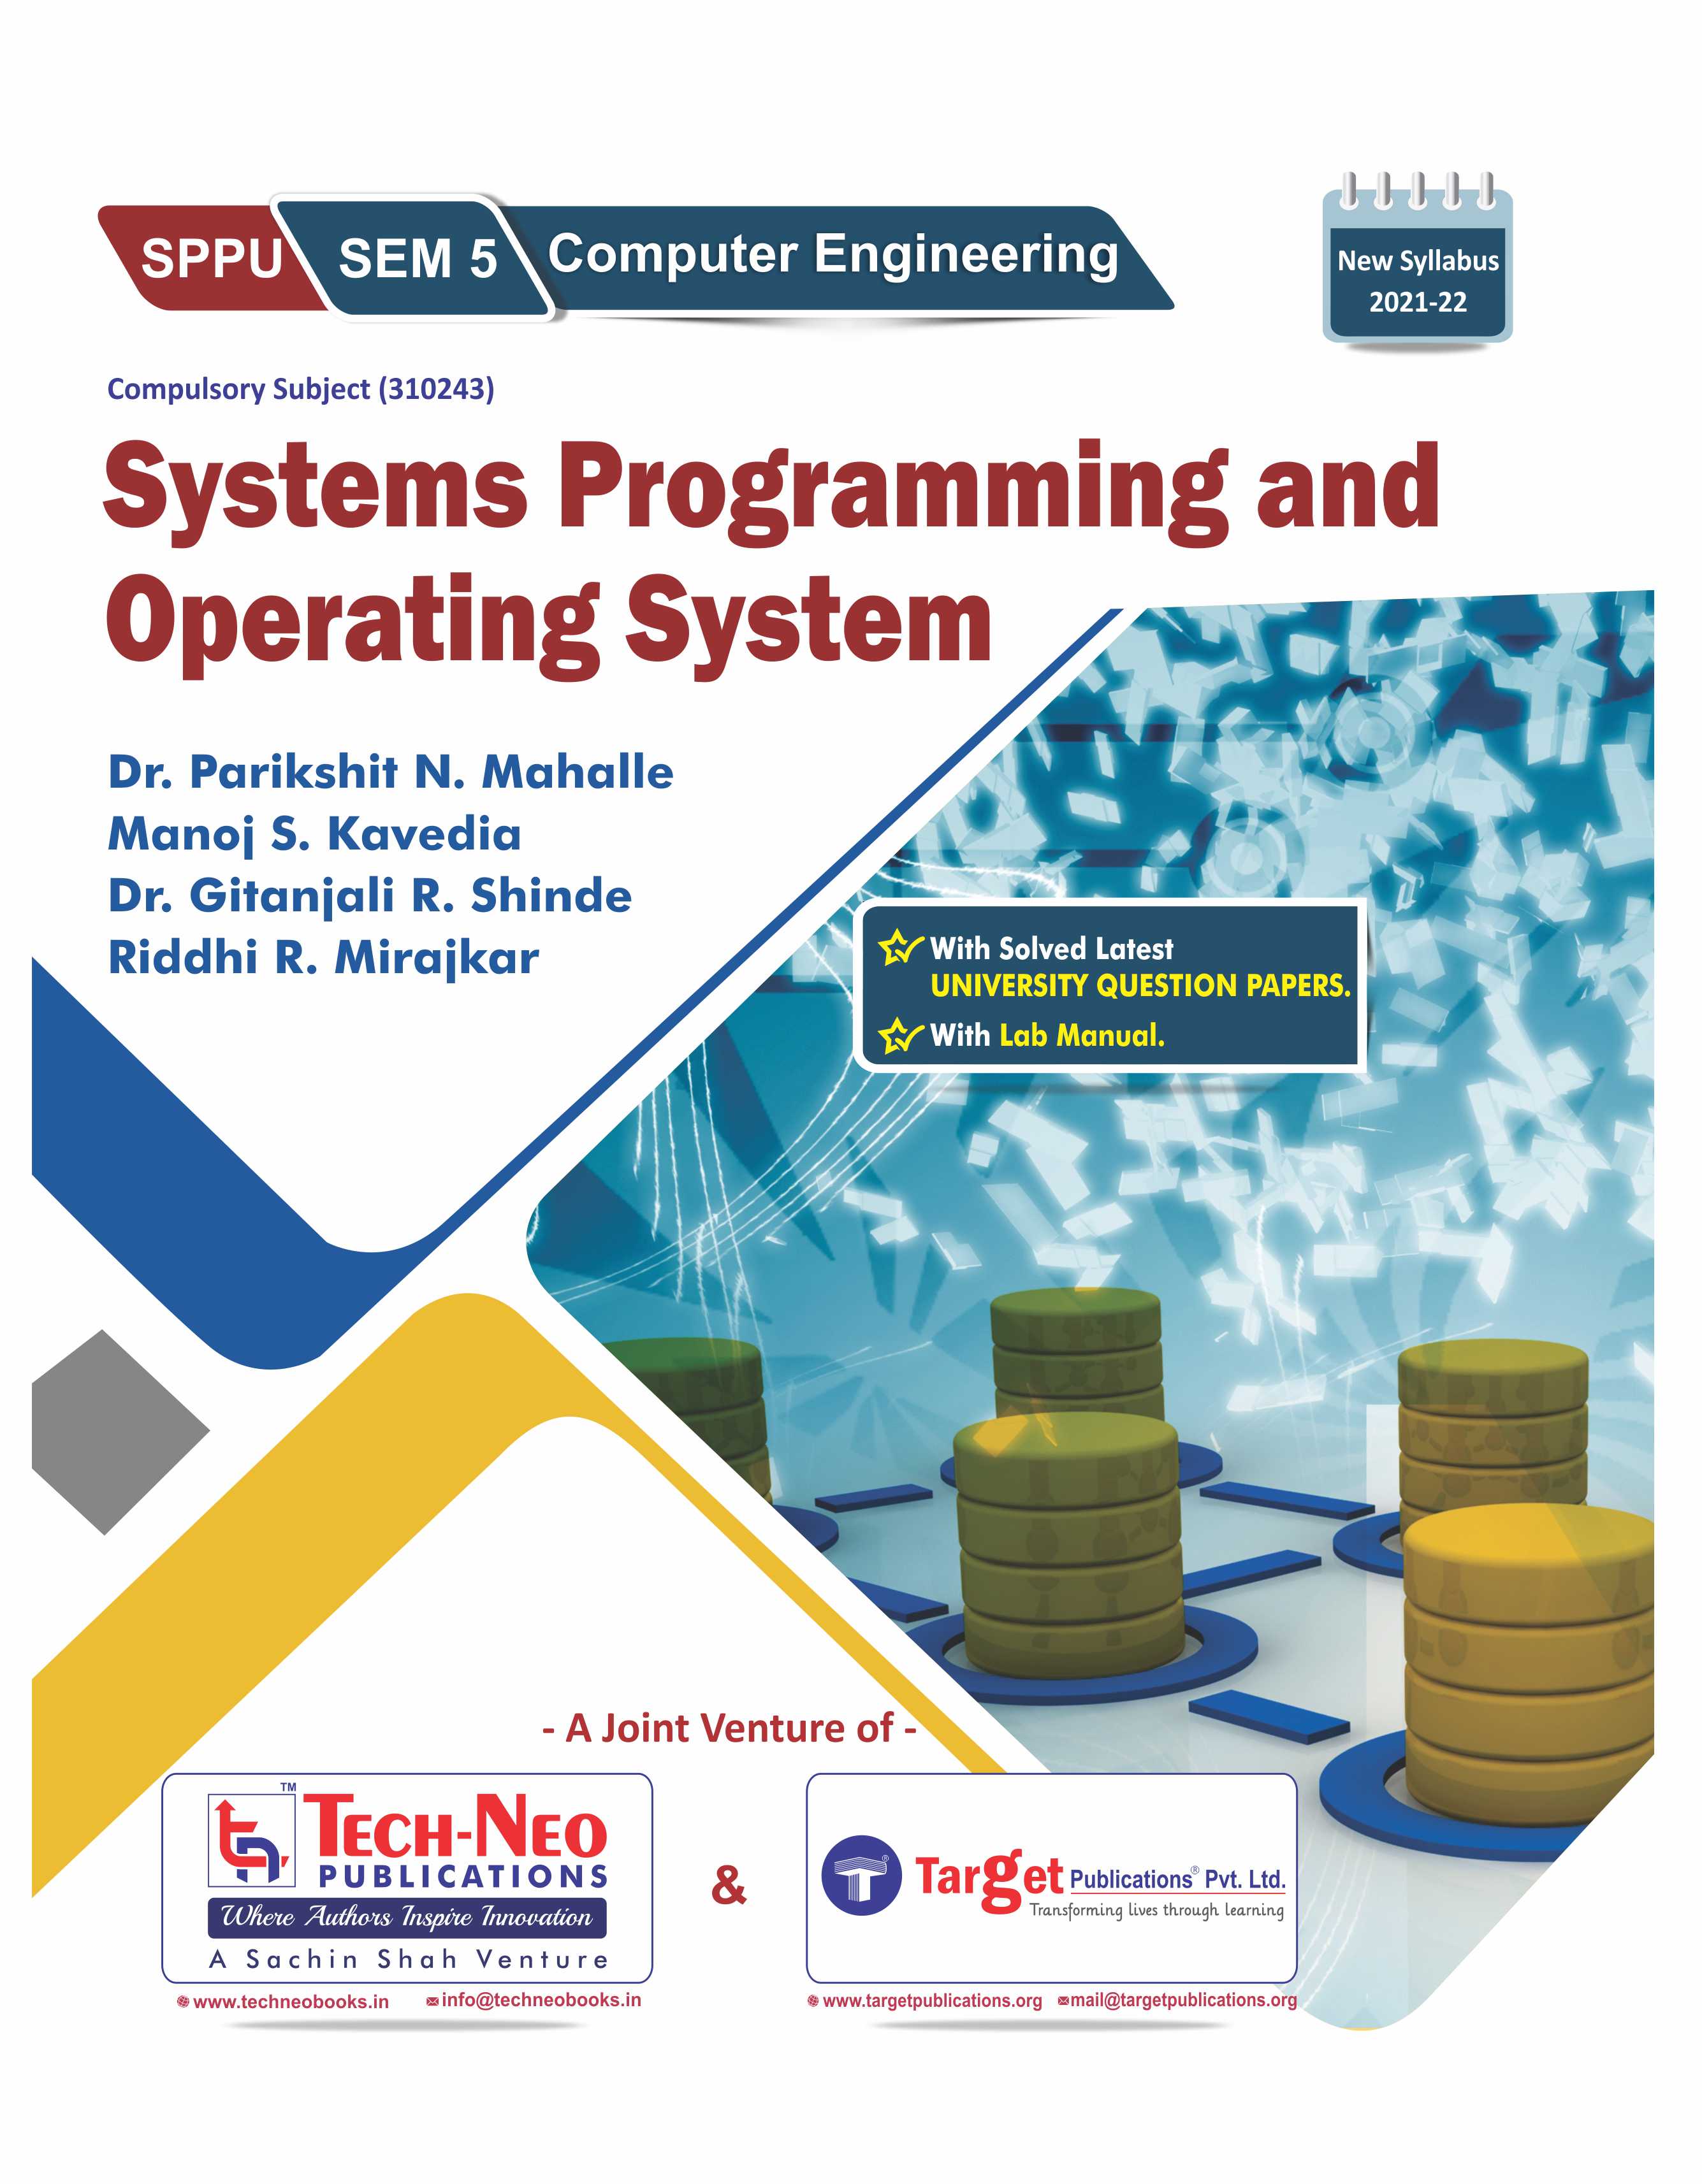 Systems Programming and Operating System